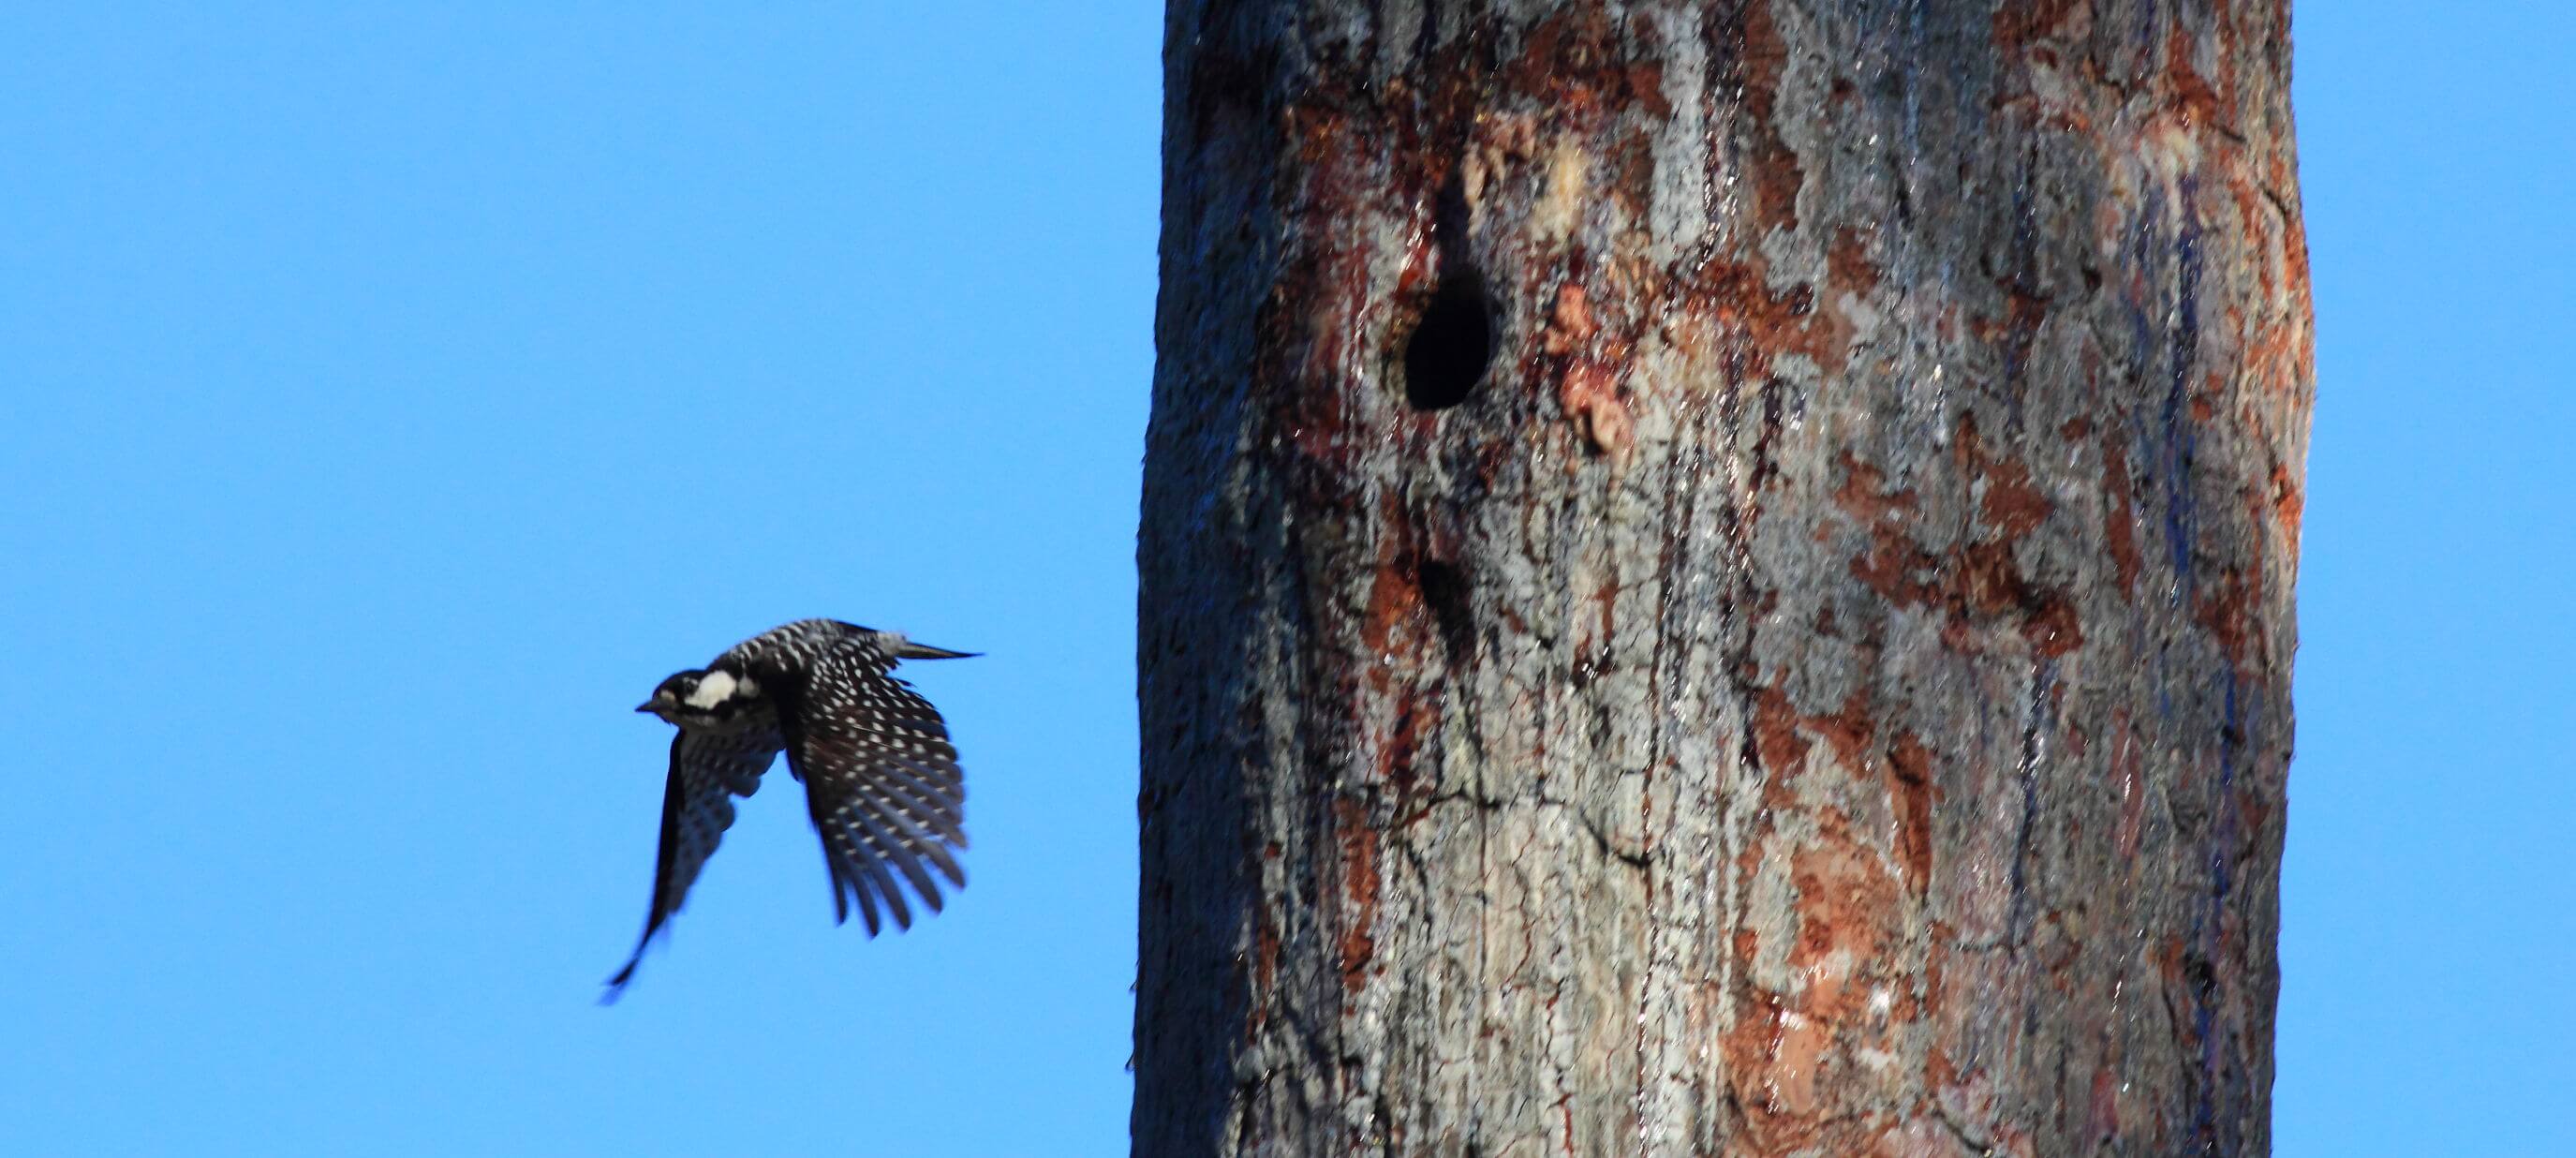 The near-threatened Red-cockaded Woodpecker, pictured here in Arkansas's Felsenthal National Wildlife Refuge, is a habitat specialist that depends on open pine forest. Photo by Bruce Beehler.